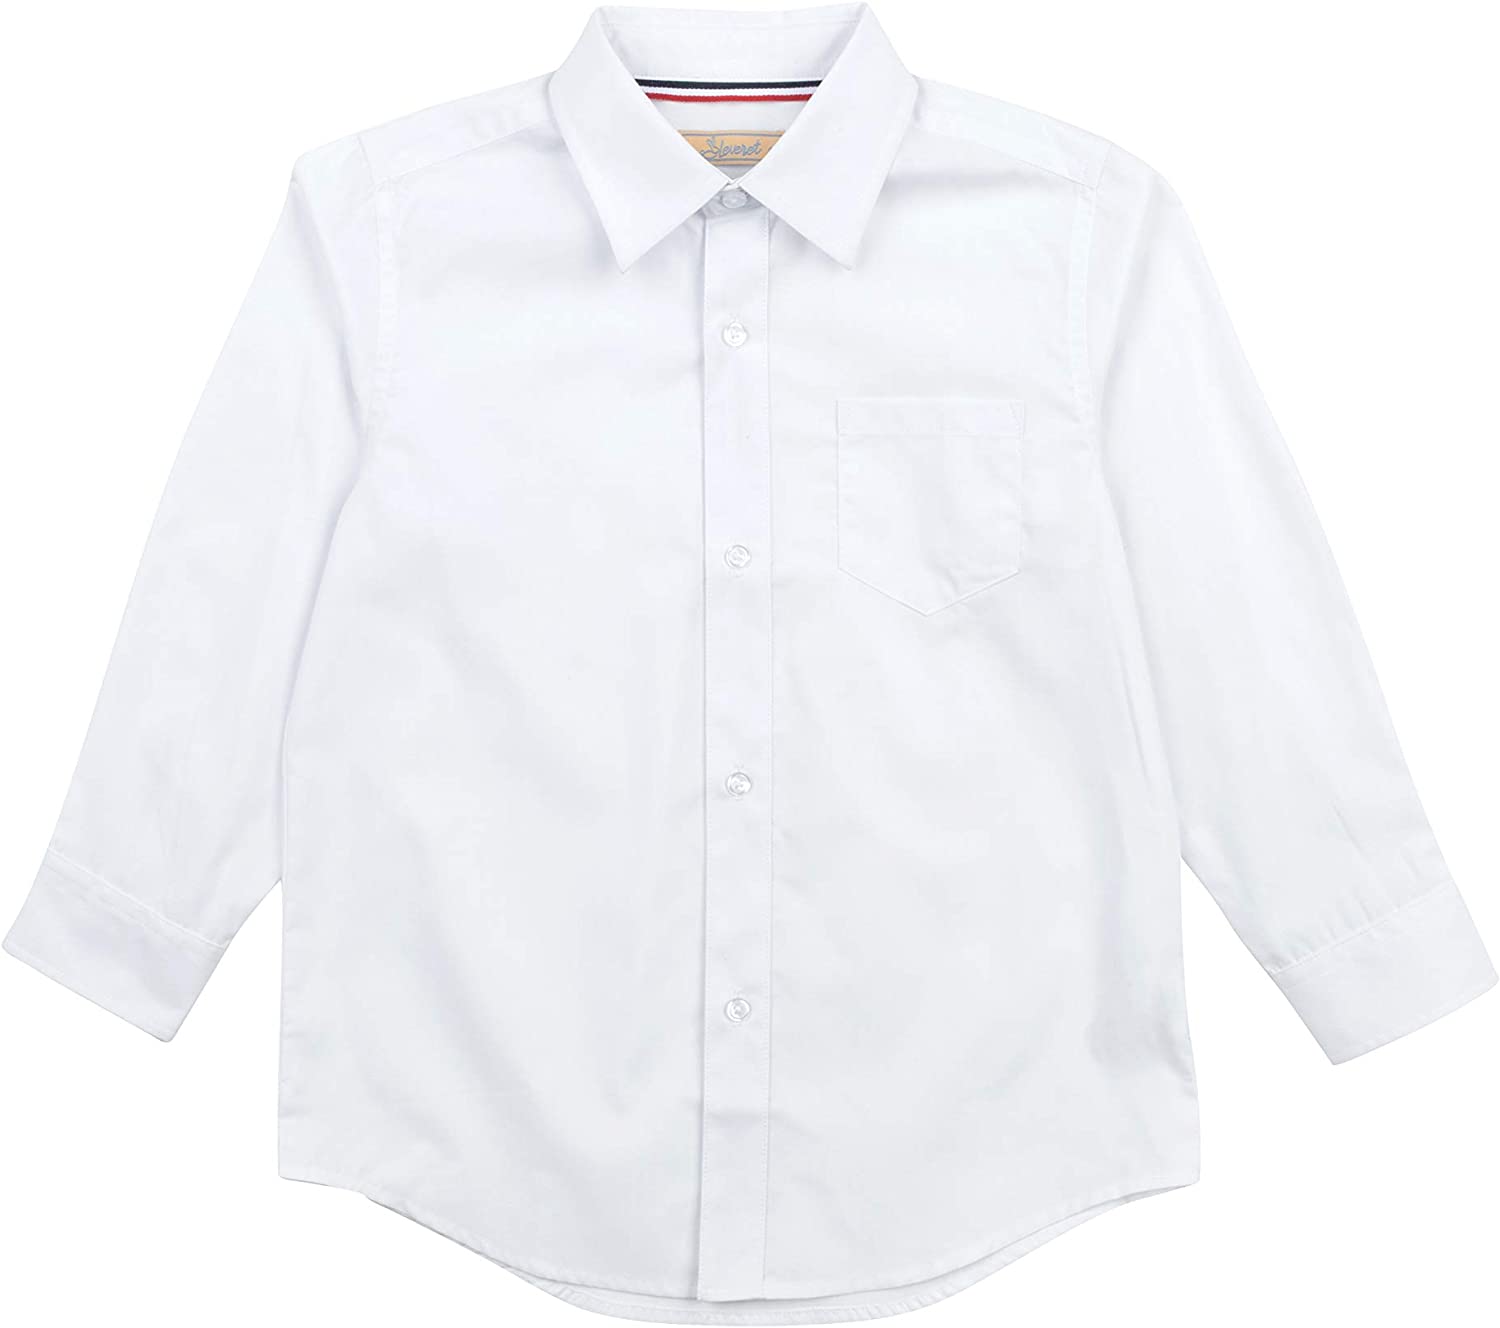 Leveret Kids & Toddler Boys Long Sleeve Uniform Cotton Dress Shirt Variety of Colors (Size 2-14 Years) (White, 3 Years) - image 2 of 3